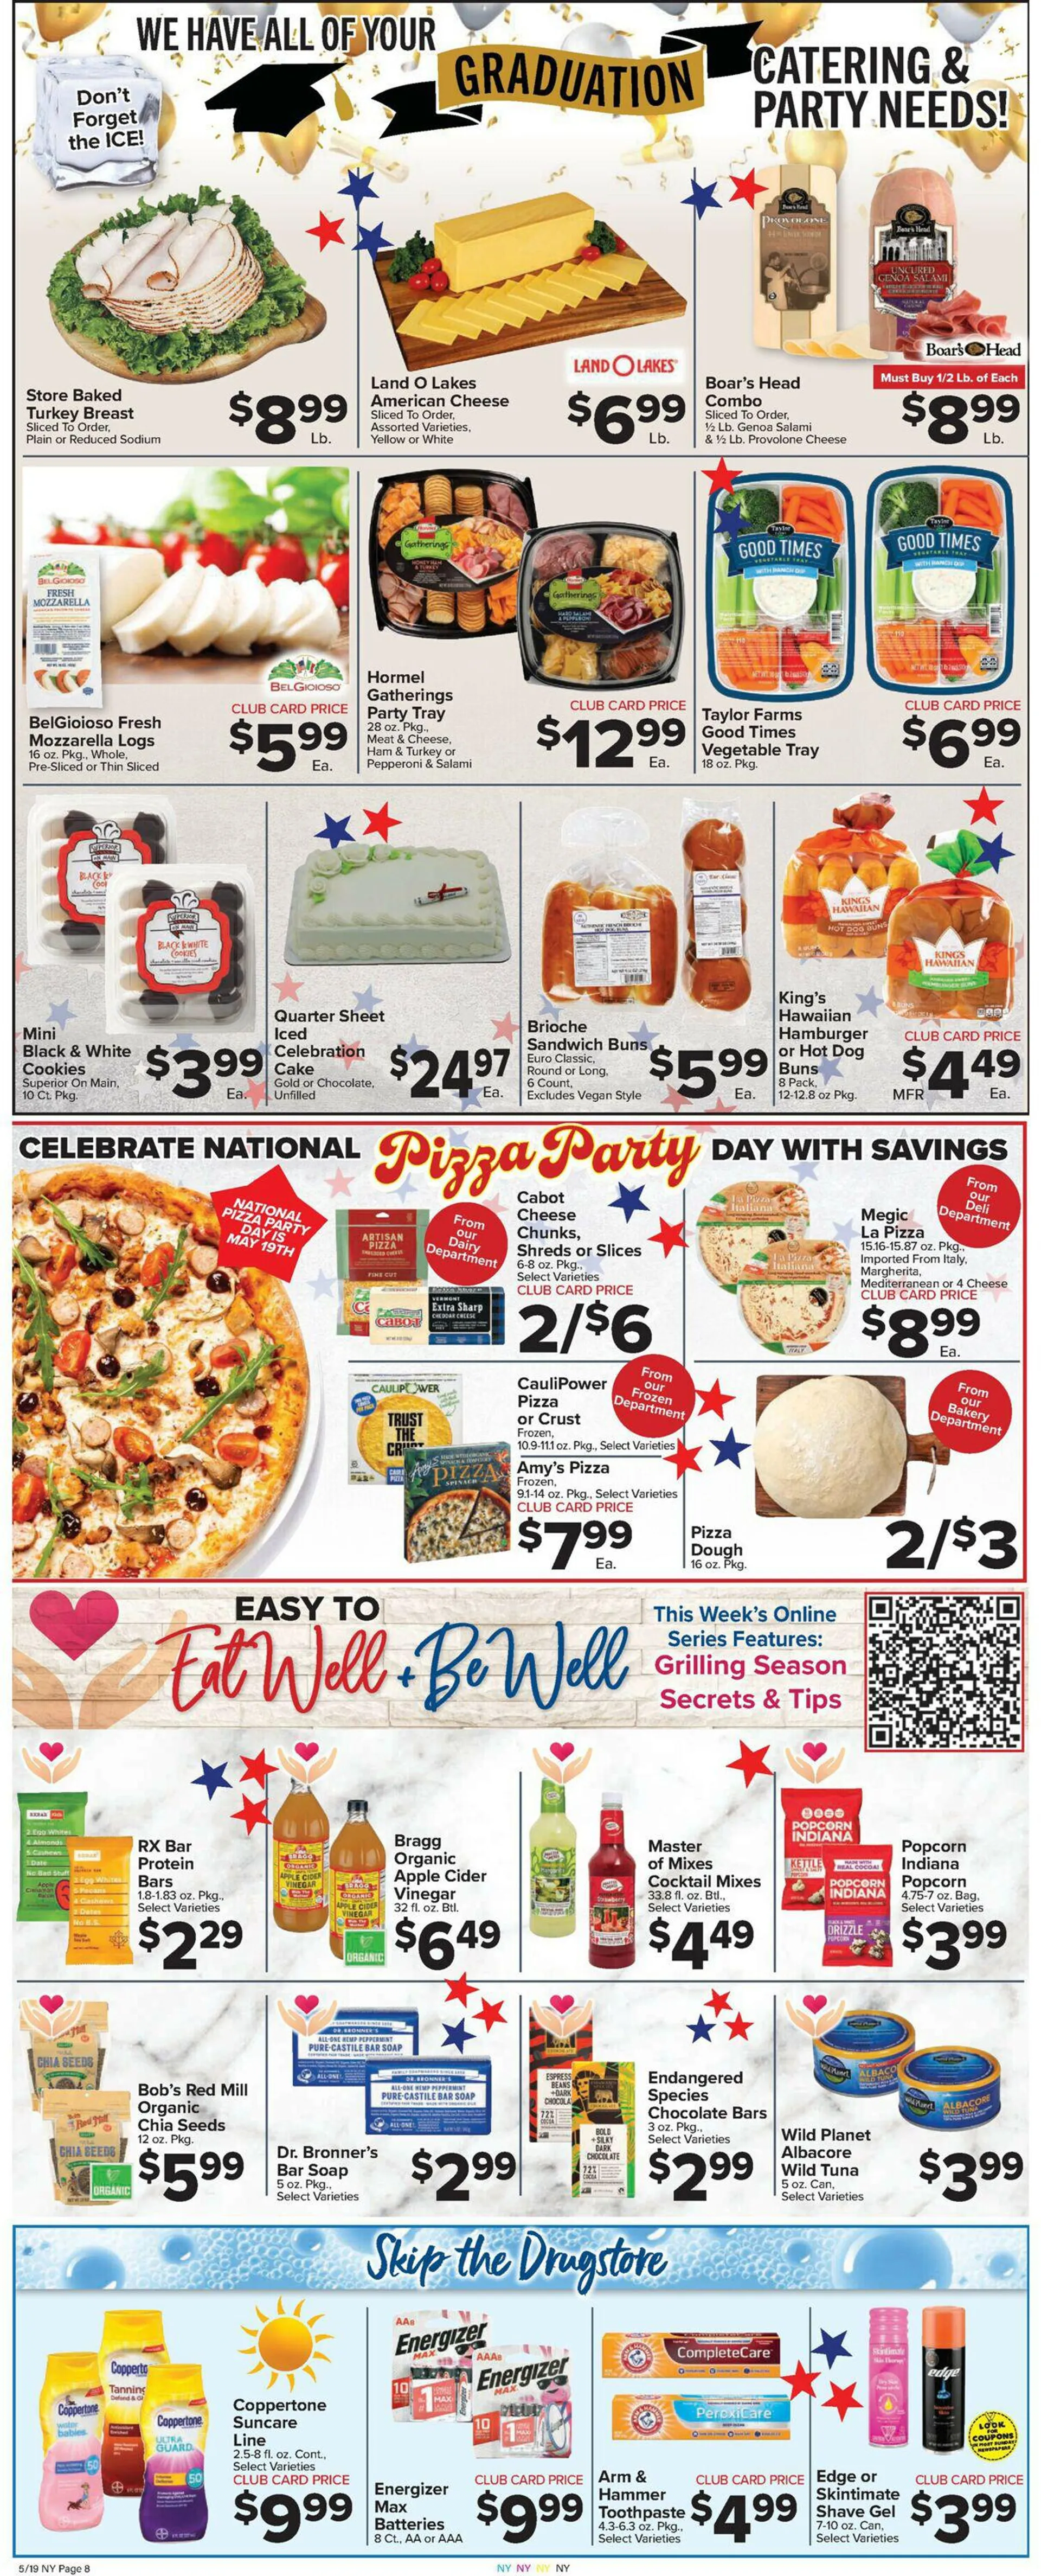 Foodtown Current weekly ad - 2